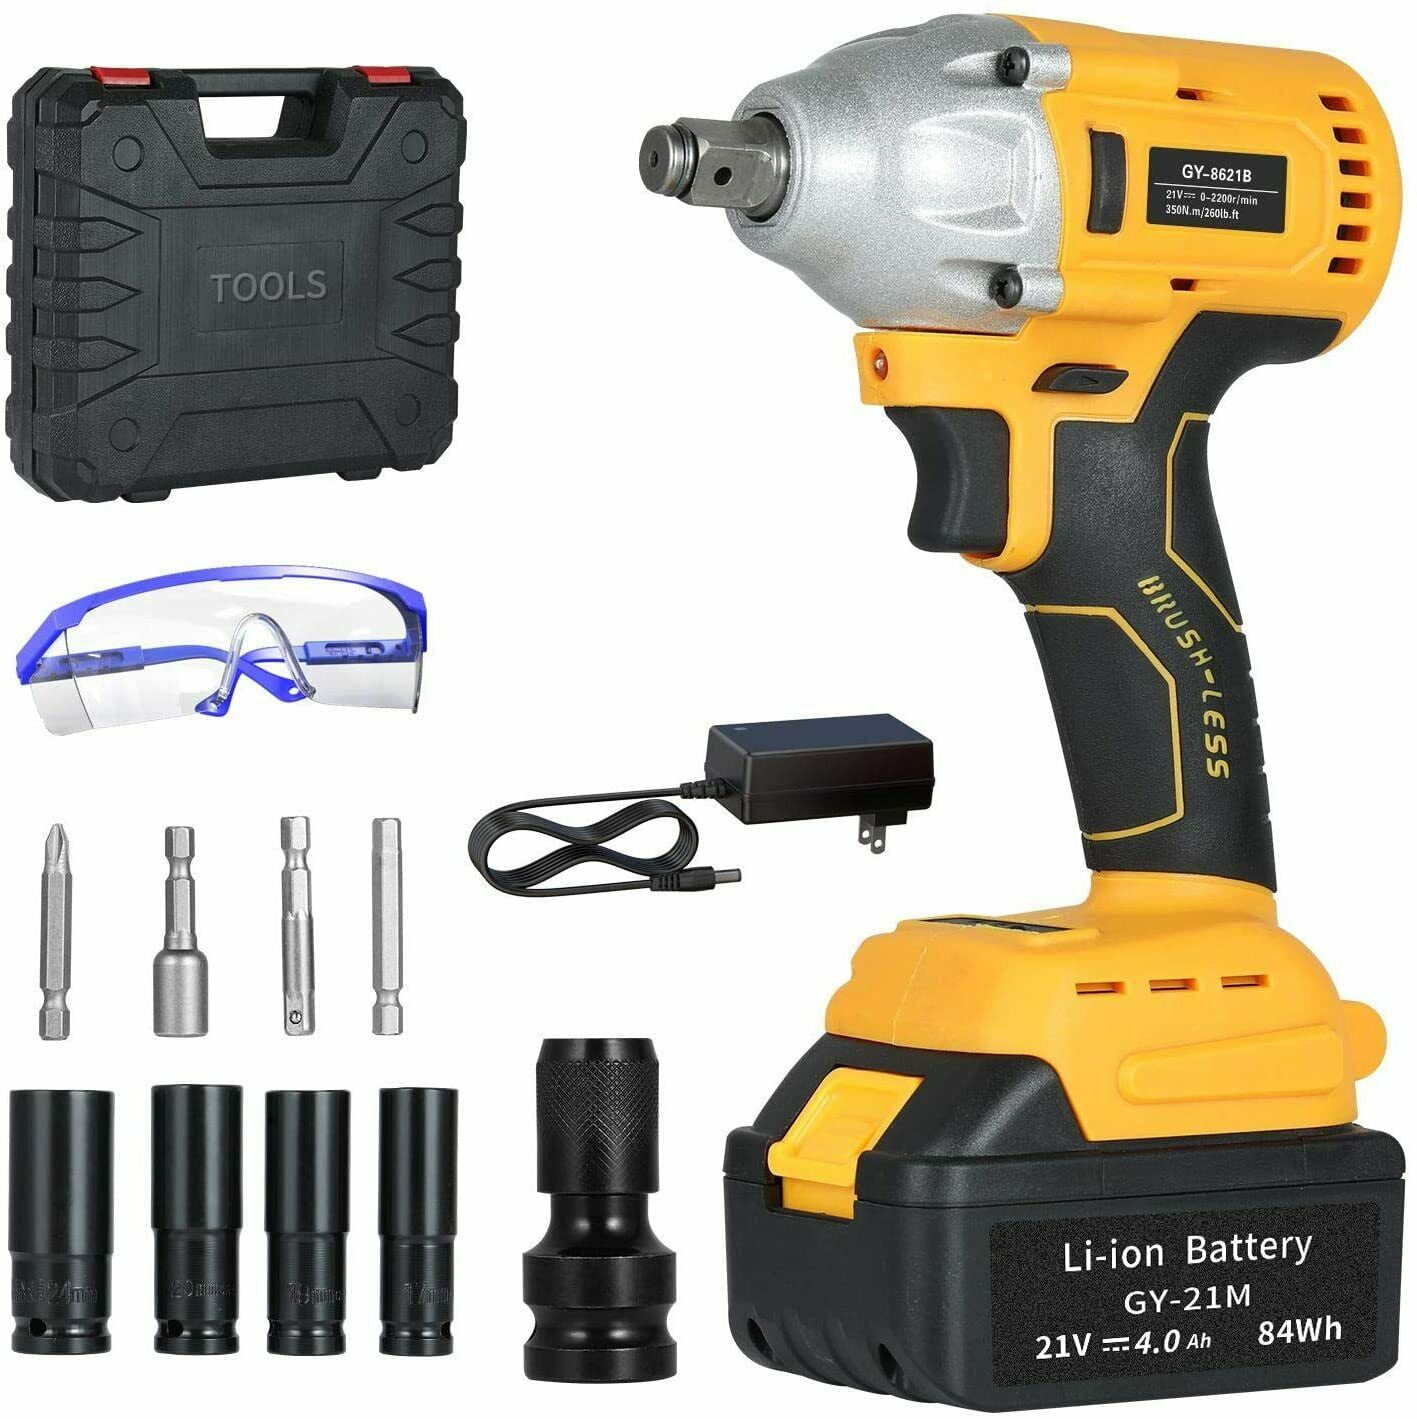 Details about   21V Cordless Impact Wrench 1/2" 520Nm Brushless Power Tool w/ 2 Li-Ion Batteries 